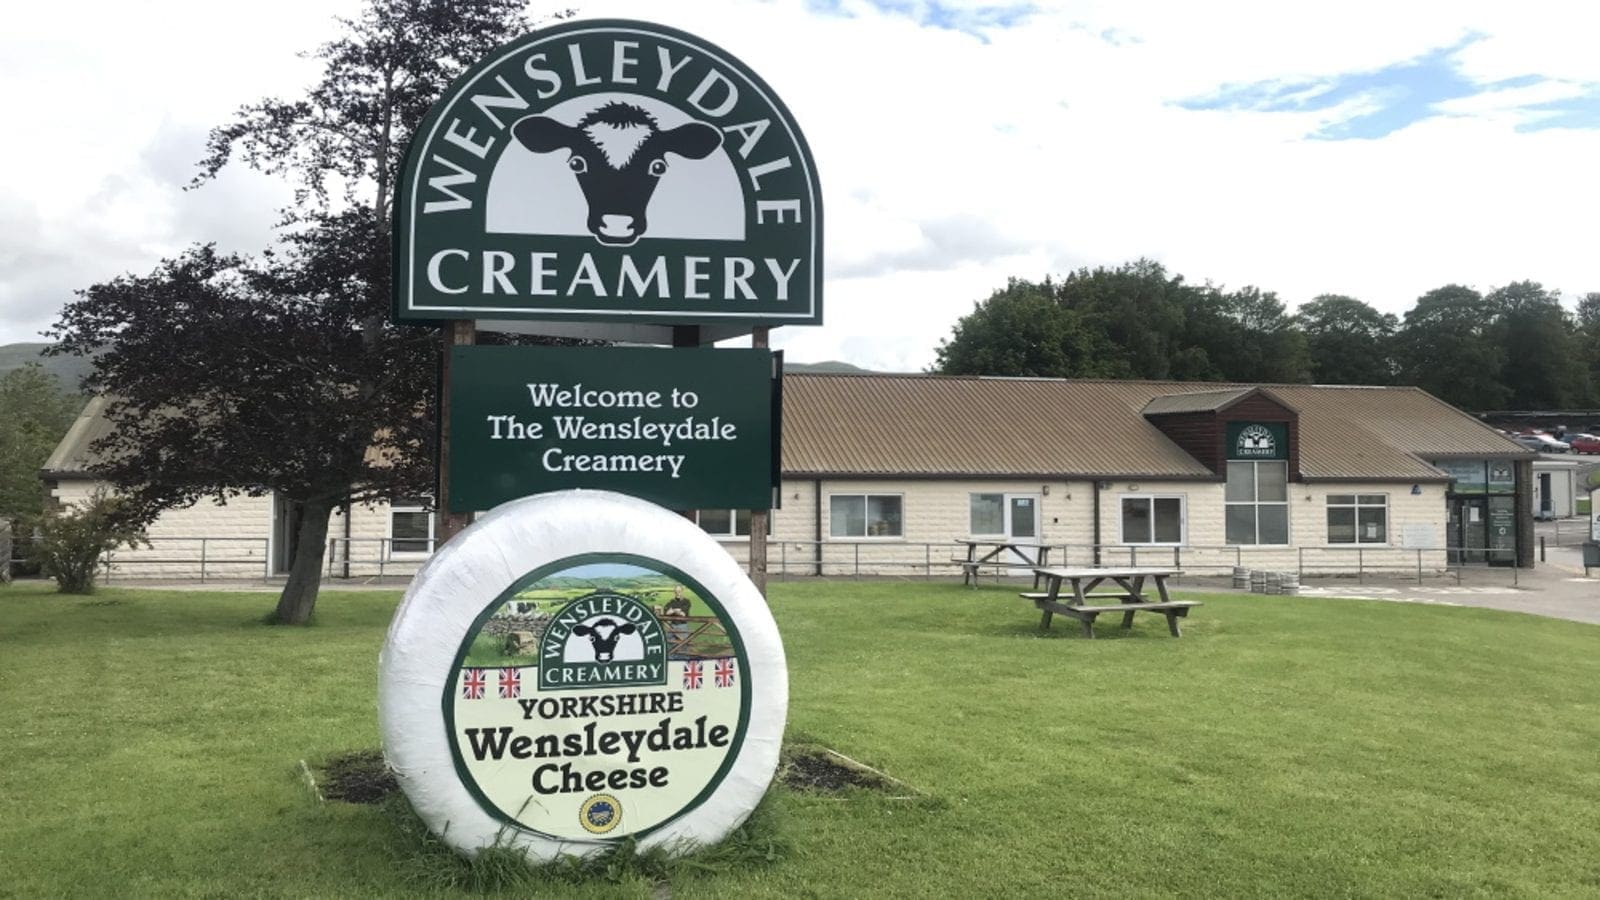 Saputo strengthens position in UK dairy market with acquisition of Wensleydale Dairy